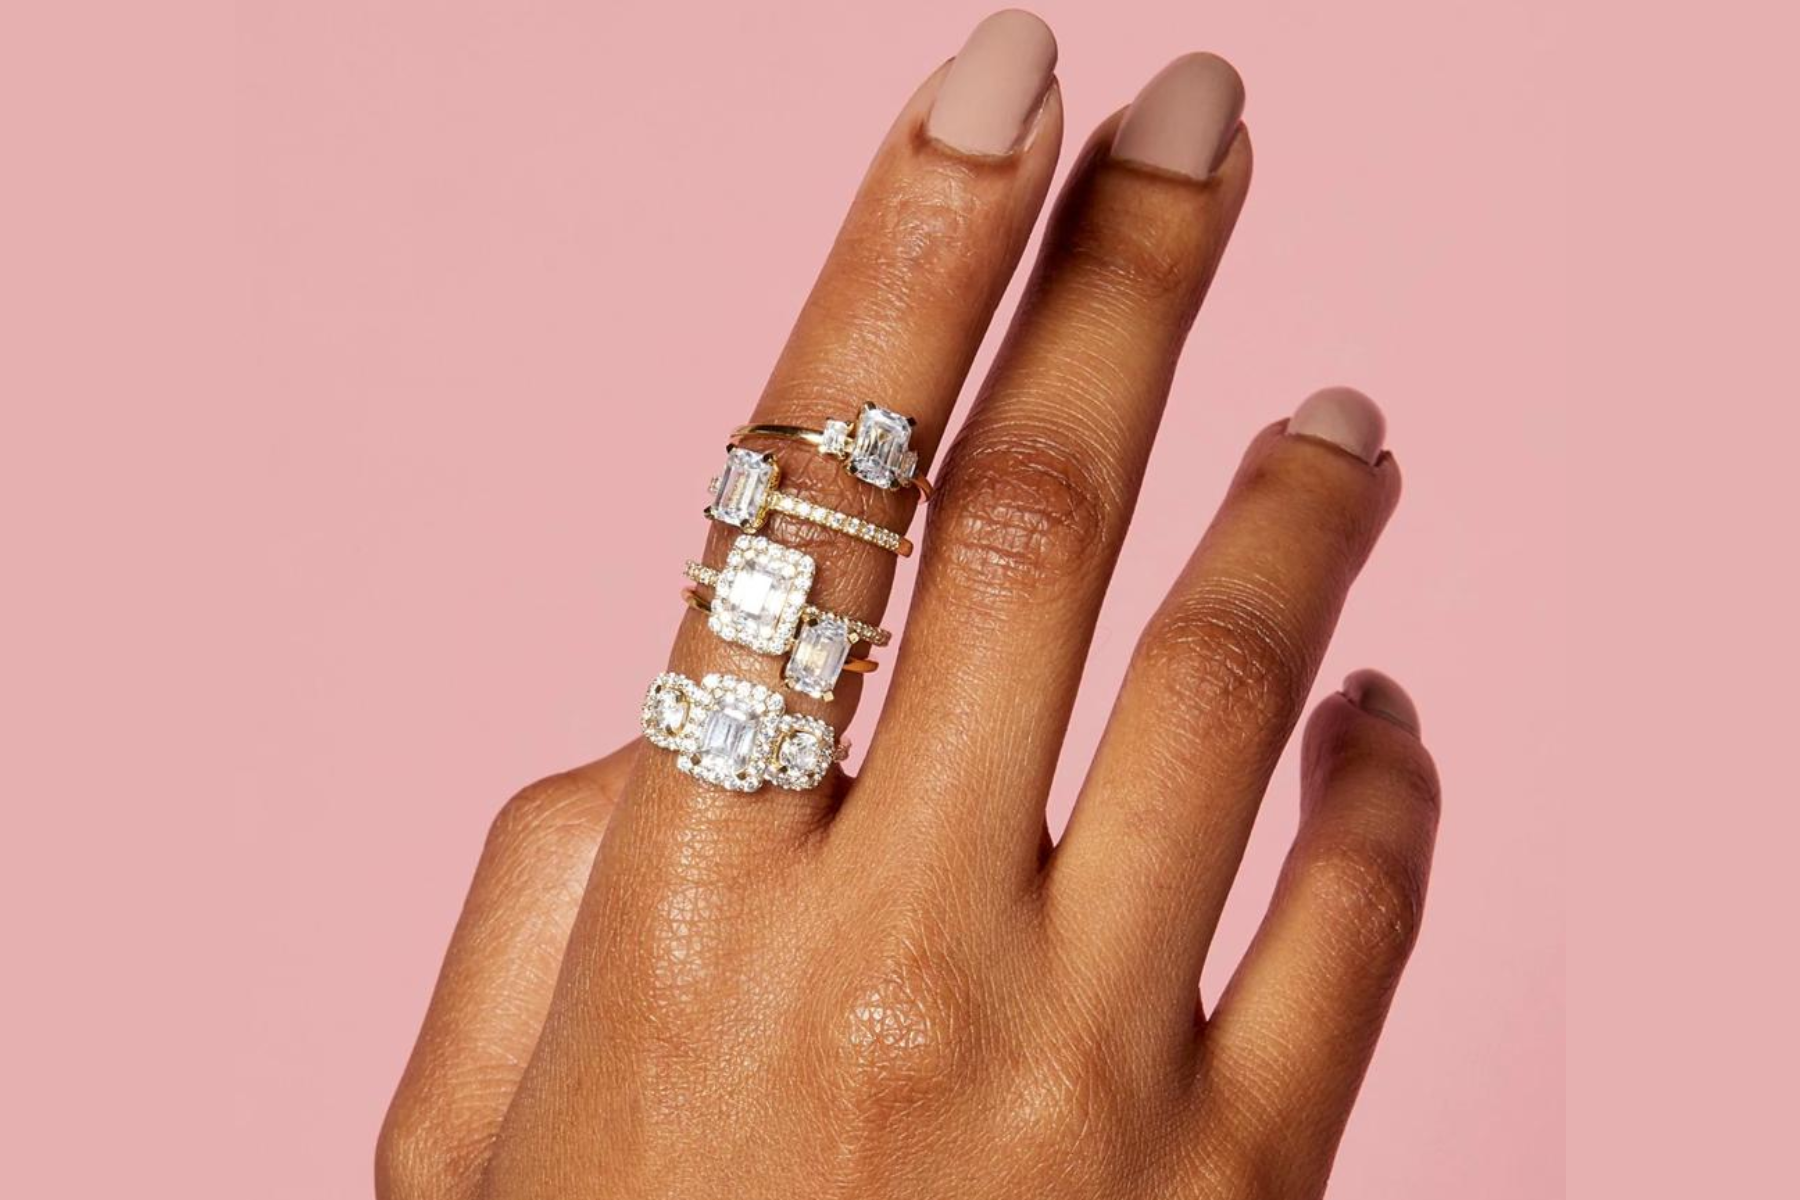 Five engagement rings on a woman's finger